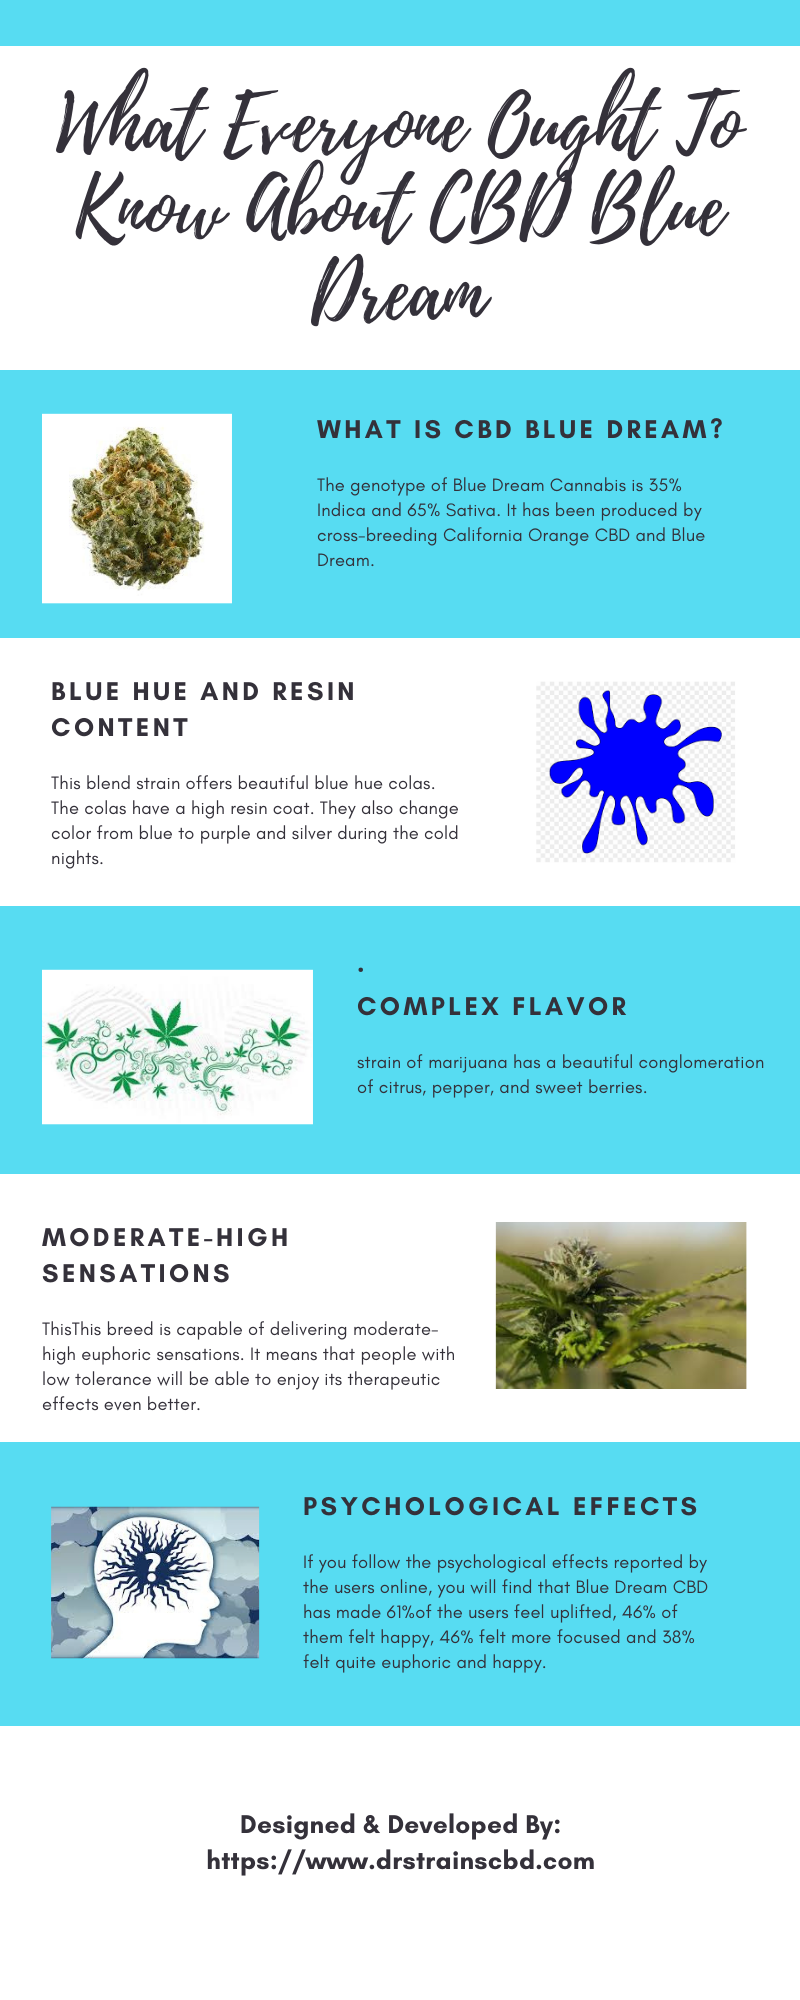 What Everyone Ought To Know About CBD Blue Dream.png  by drstrainscbd